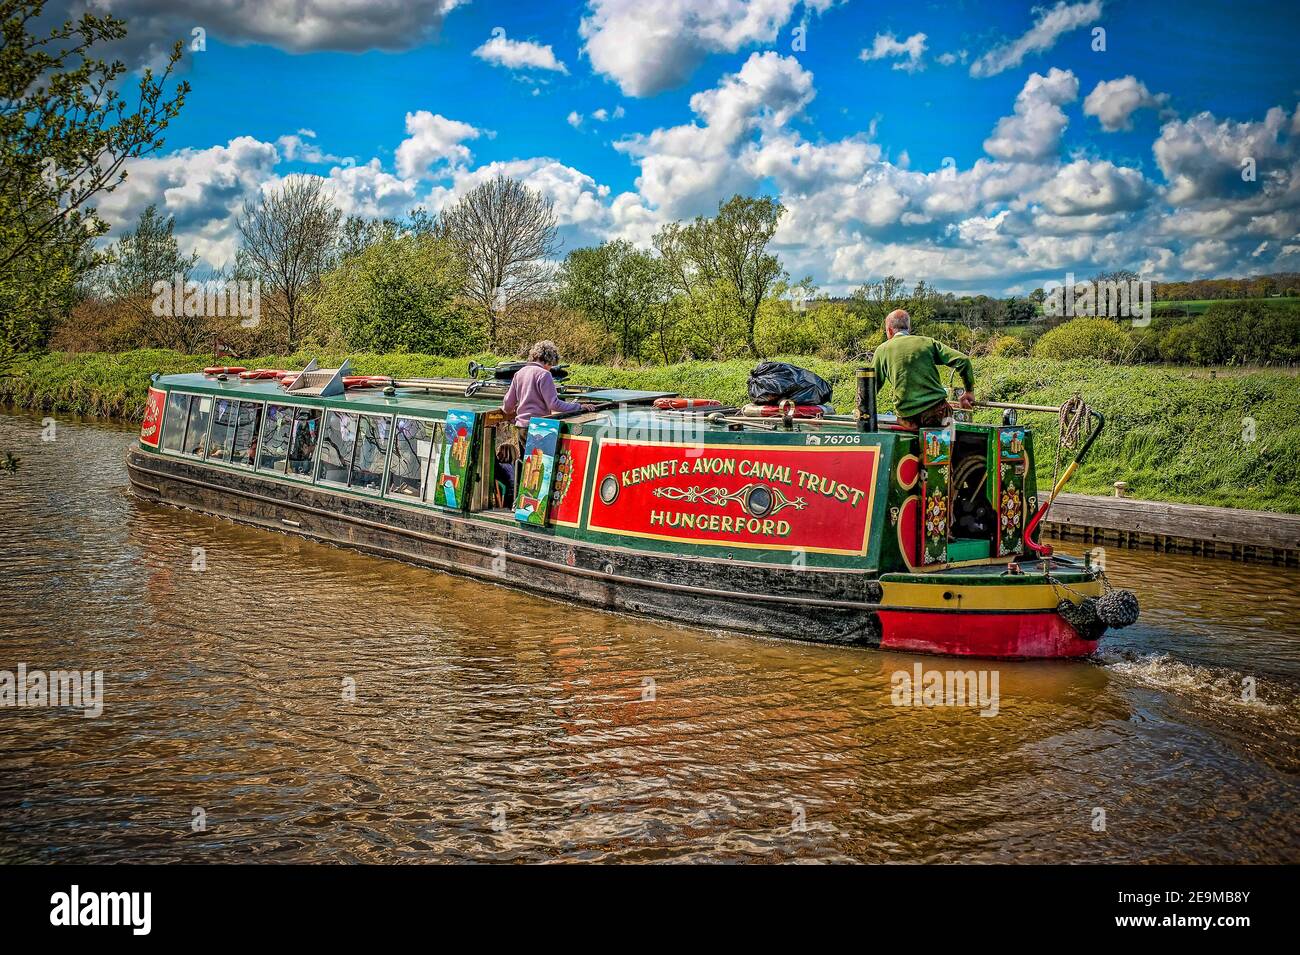 The colourful Kennet and Avon canal trust barge Rose of Hungerford makes its way down the Kennet and Avon Canal near Hungerford Berkshire on a bright Stock Photo